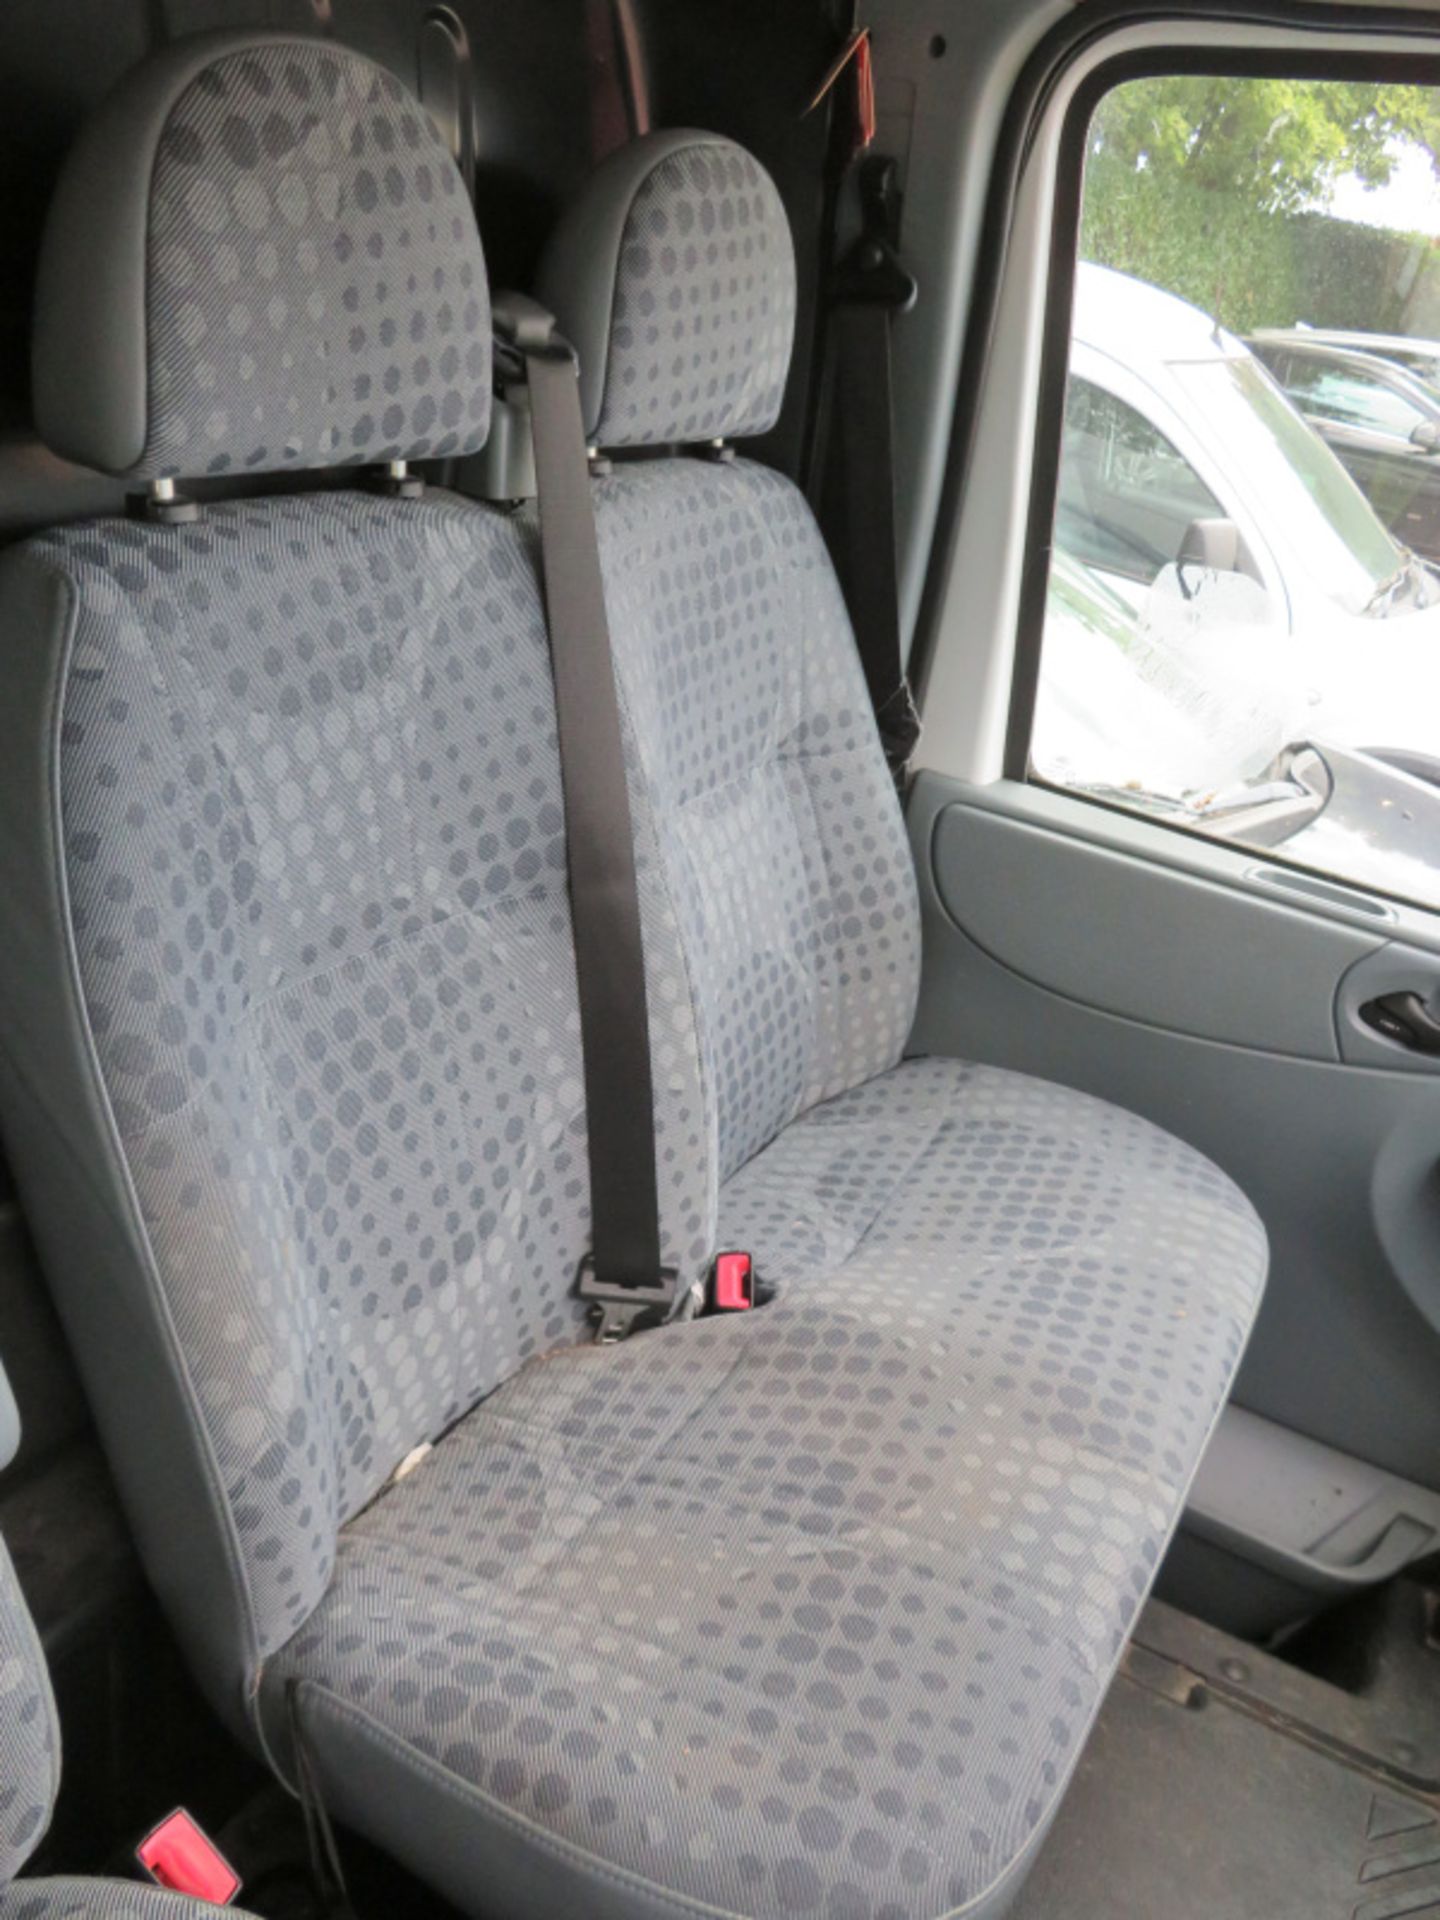 Ford Transit High Van Roof, Petrol, Mileage 33357 mile, Air conditioning, Runs & drives well on - Image 10 of 21